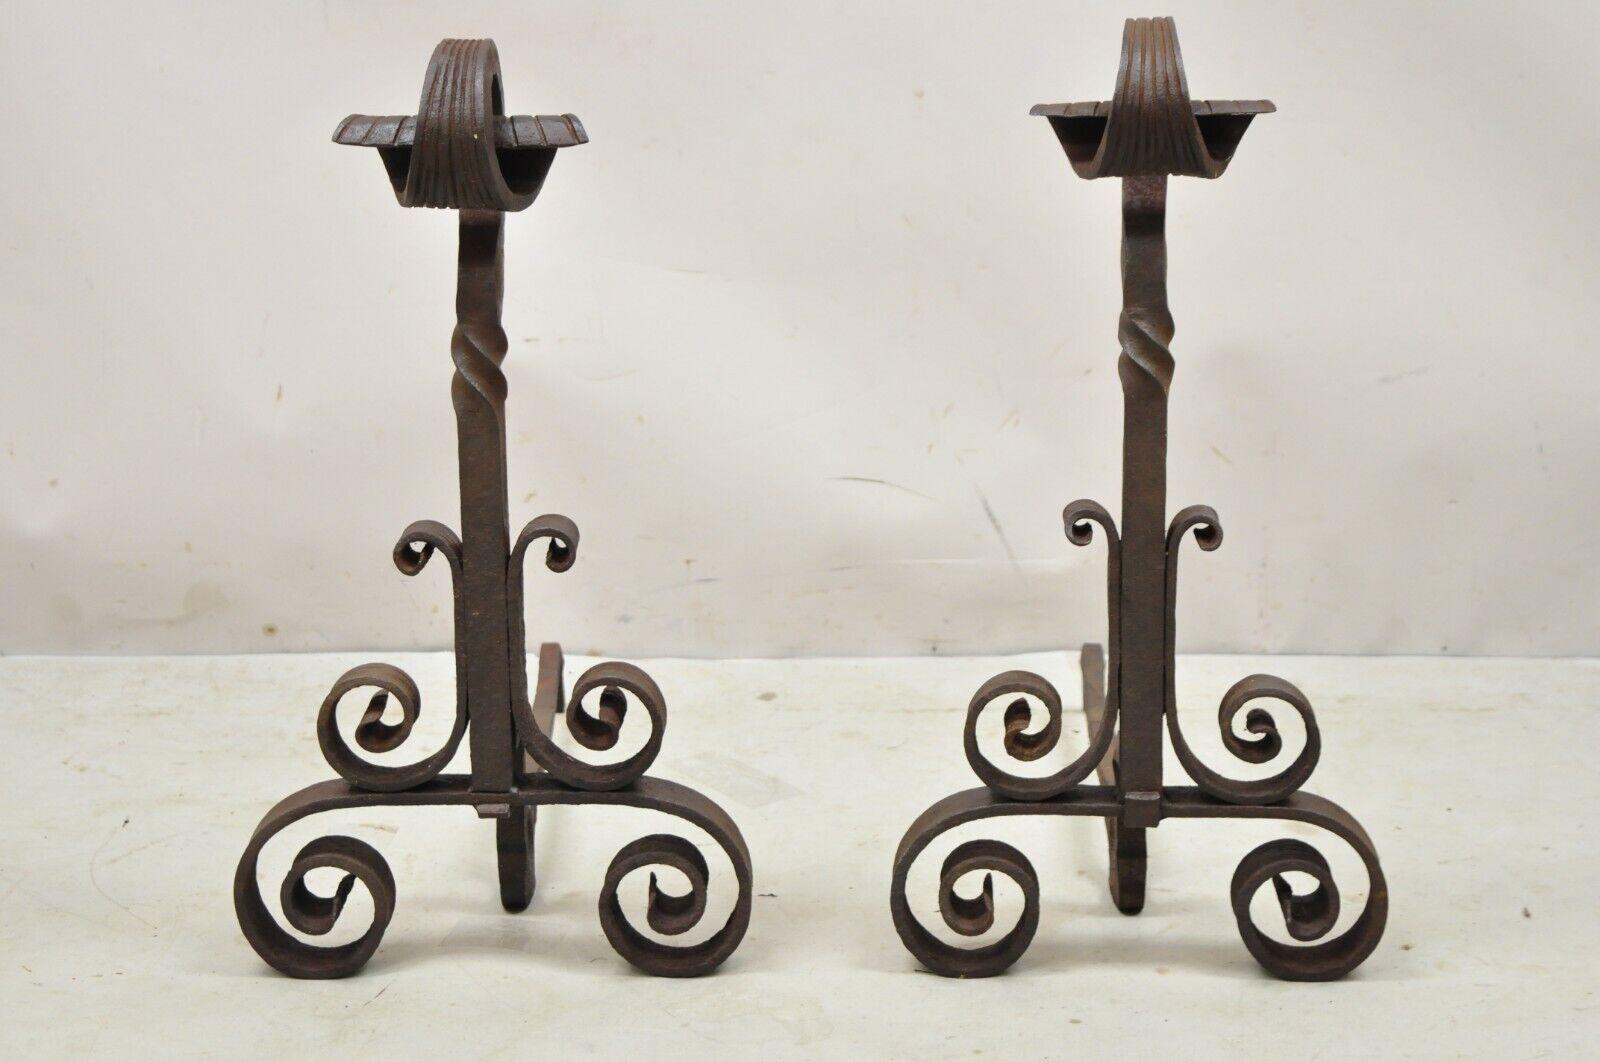 Antique Gothic Renaissance Scrolling Cast Iron Fireplace Andirons - a Pair.  Item features a heavy cast iron construction, scrolling frames, attractive rusty finish, very nice antique pair, quality craftsmanship. Circa 19th Century. Measurements: